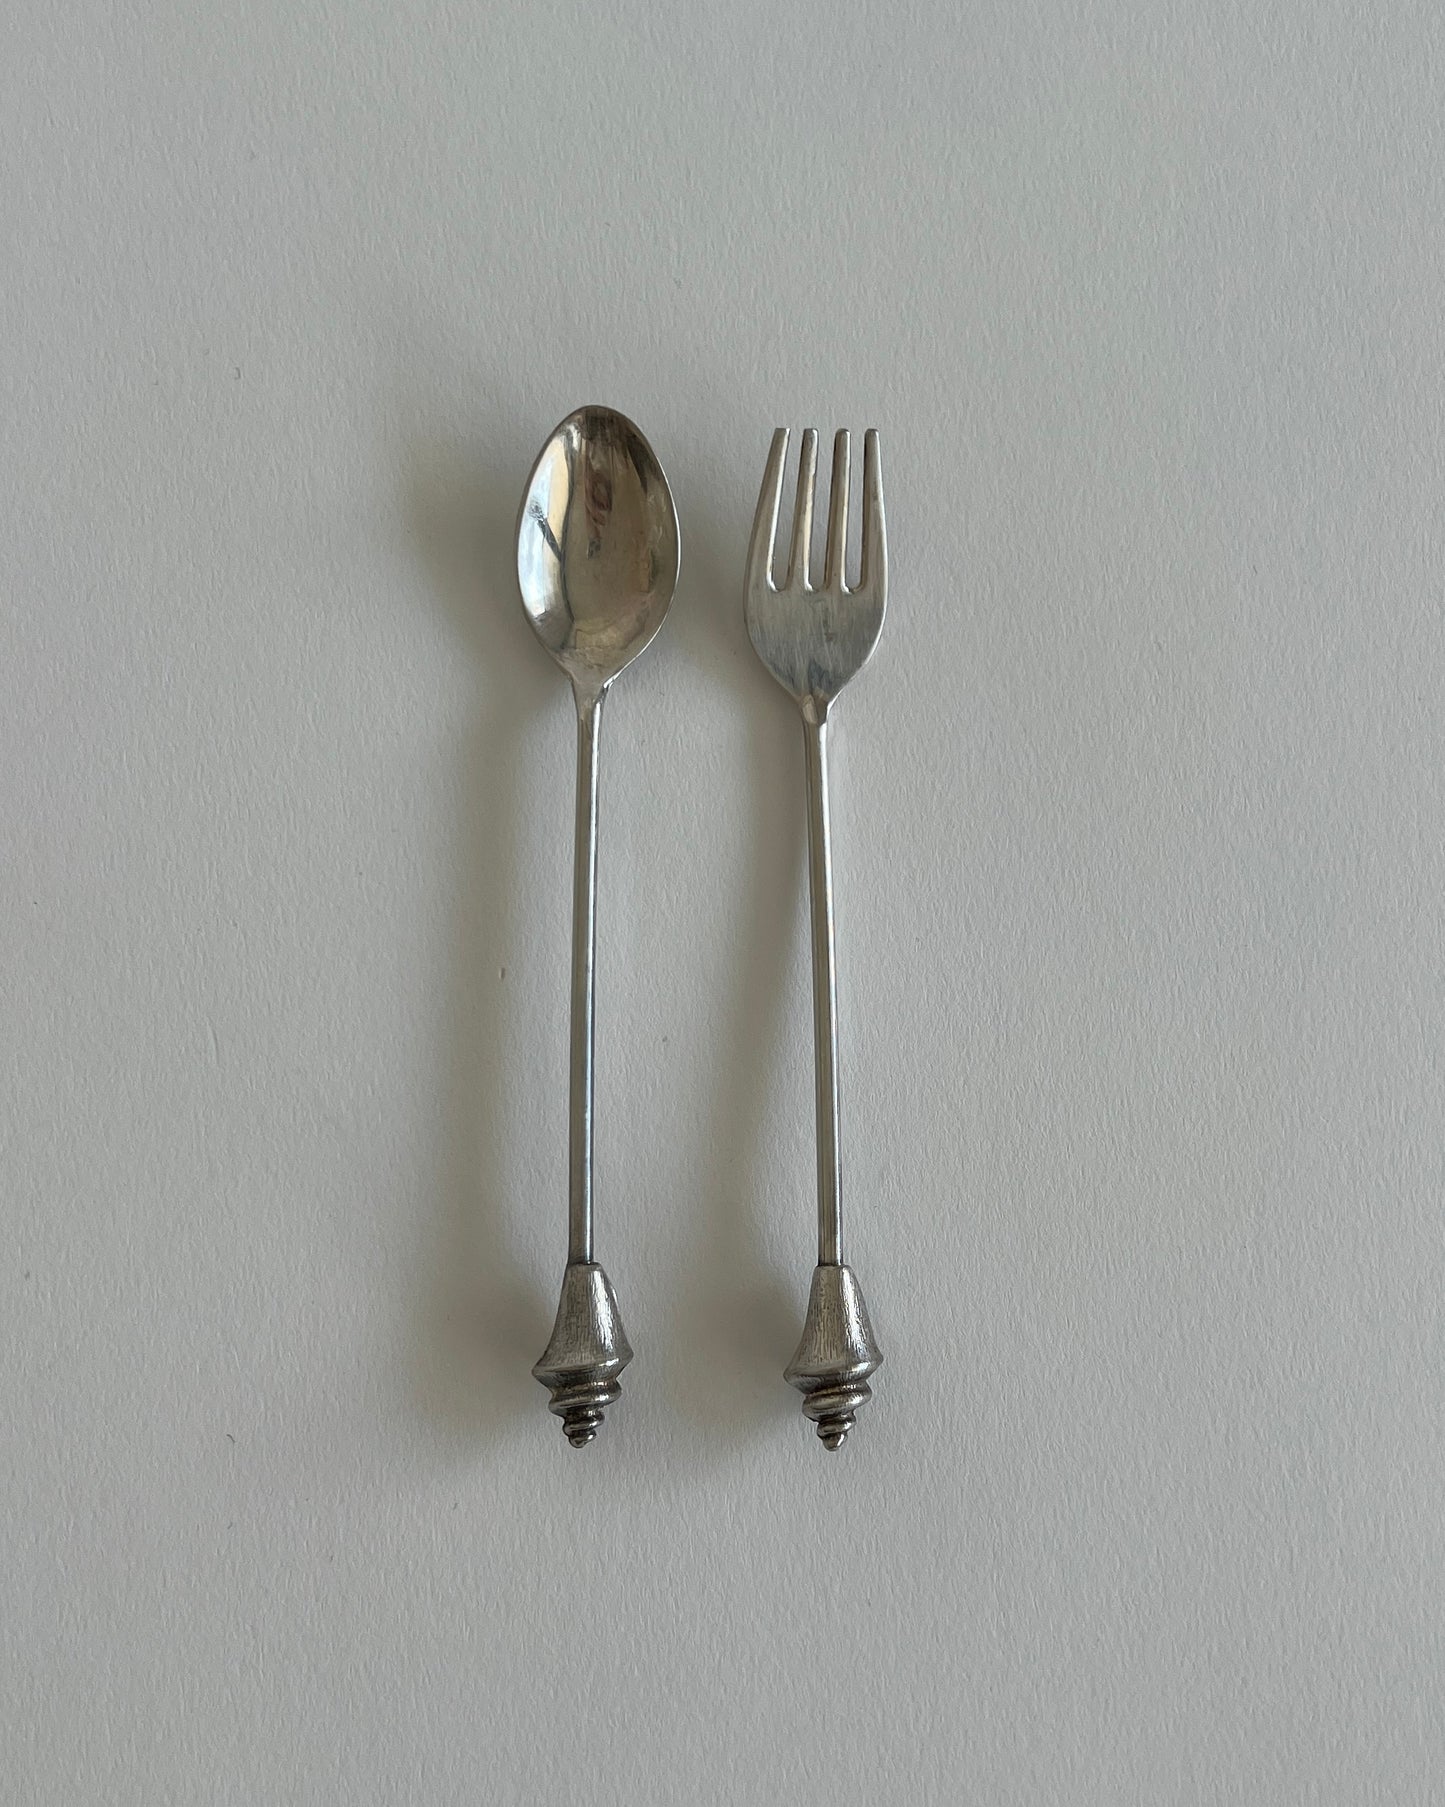 Little Teaspoon and Fork with Shells